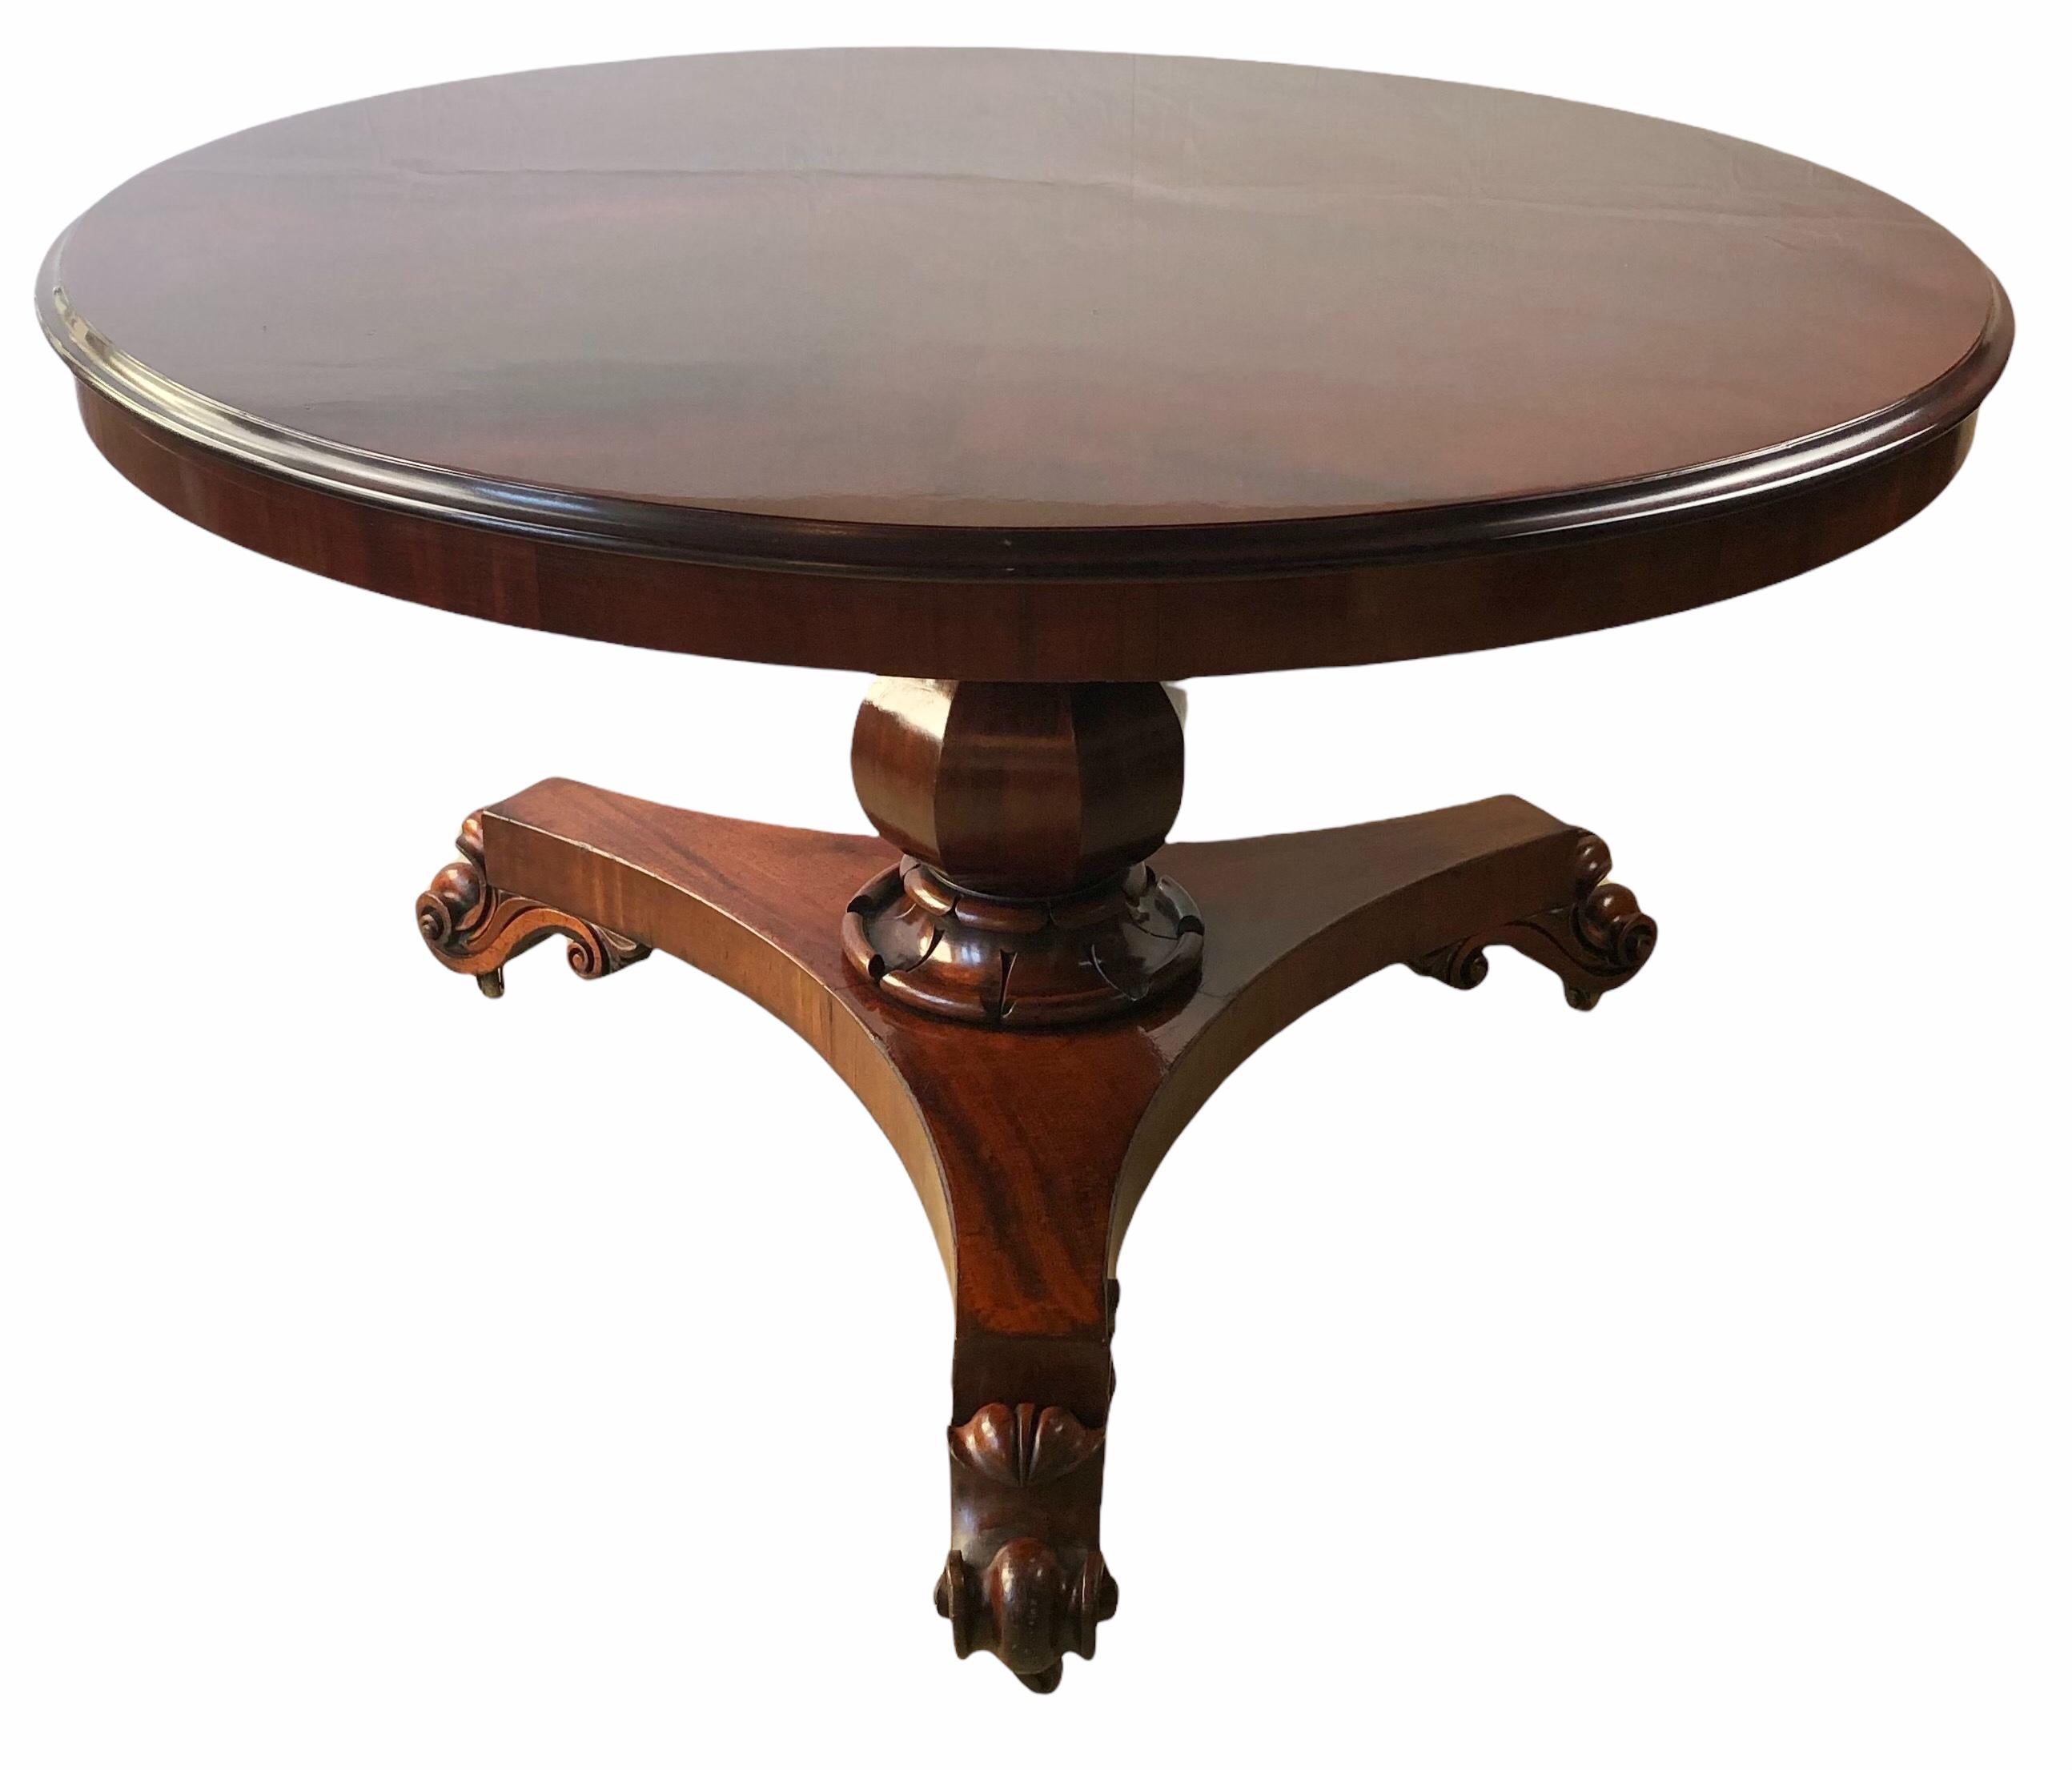 A stunning 19th century Victorian Tilt-Top Center Table or Dining Table. Constructed of solid Cuban mahogany. 

An exceptional round tilt-top table with rich solid mahogany of spectacular butterfly or open book cut. This is not a table with veneer,